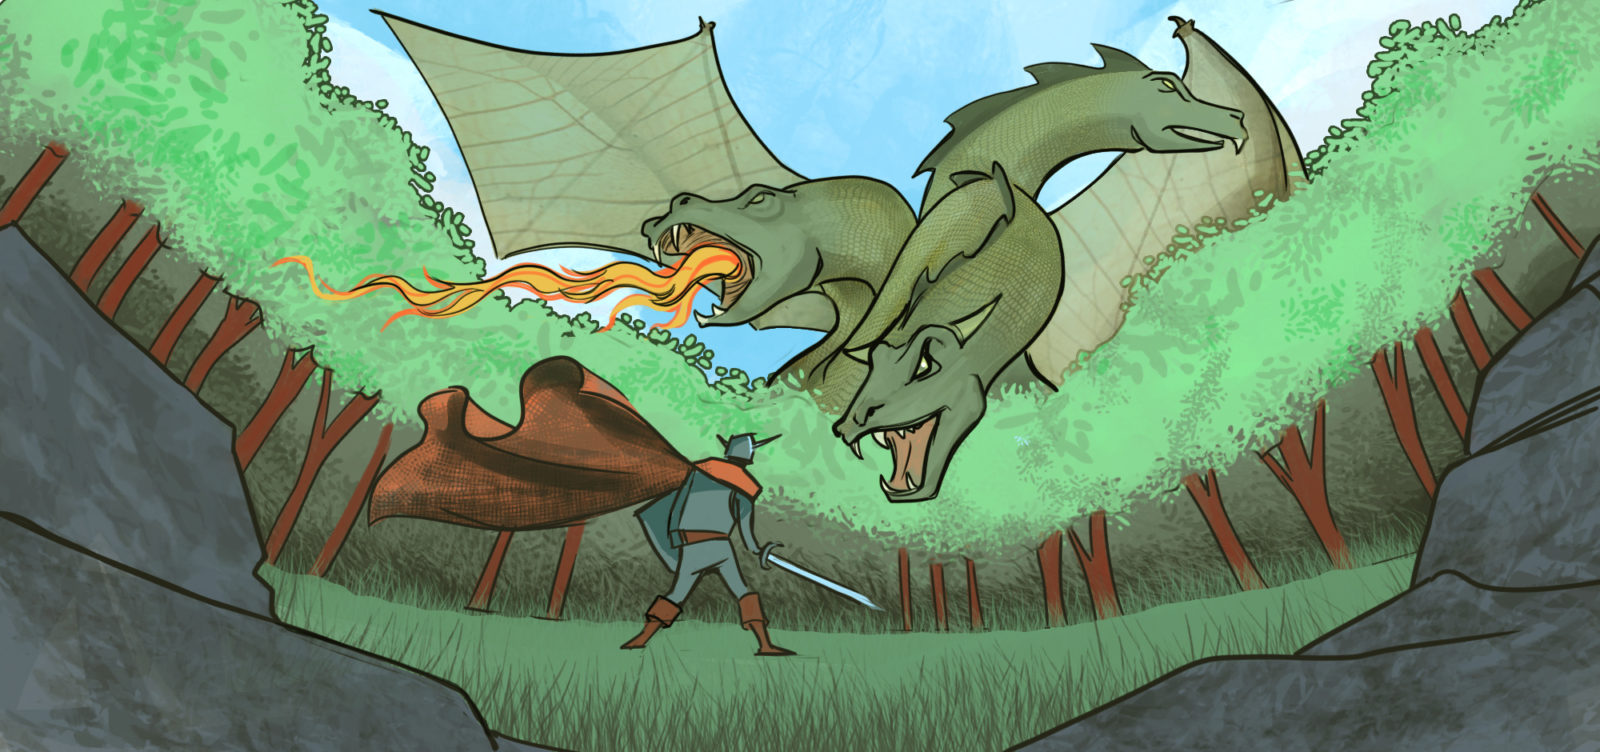 Illustration of a knight confronting a dragon in the snow | taking control of compliance